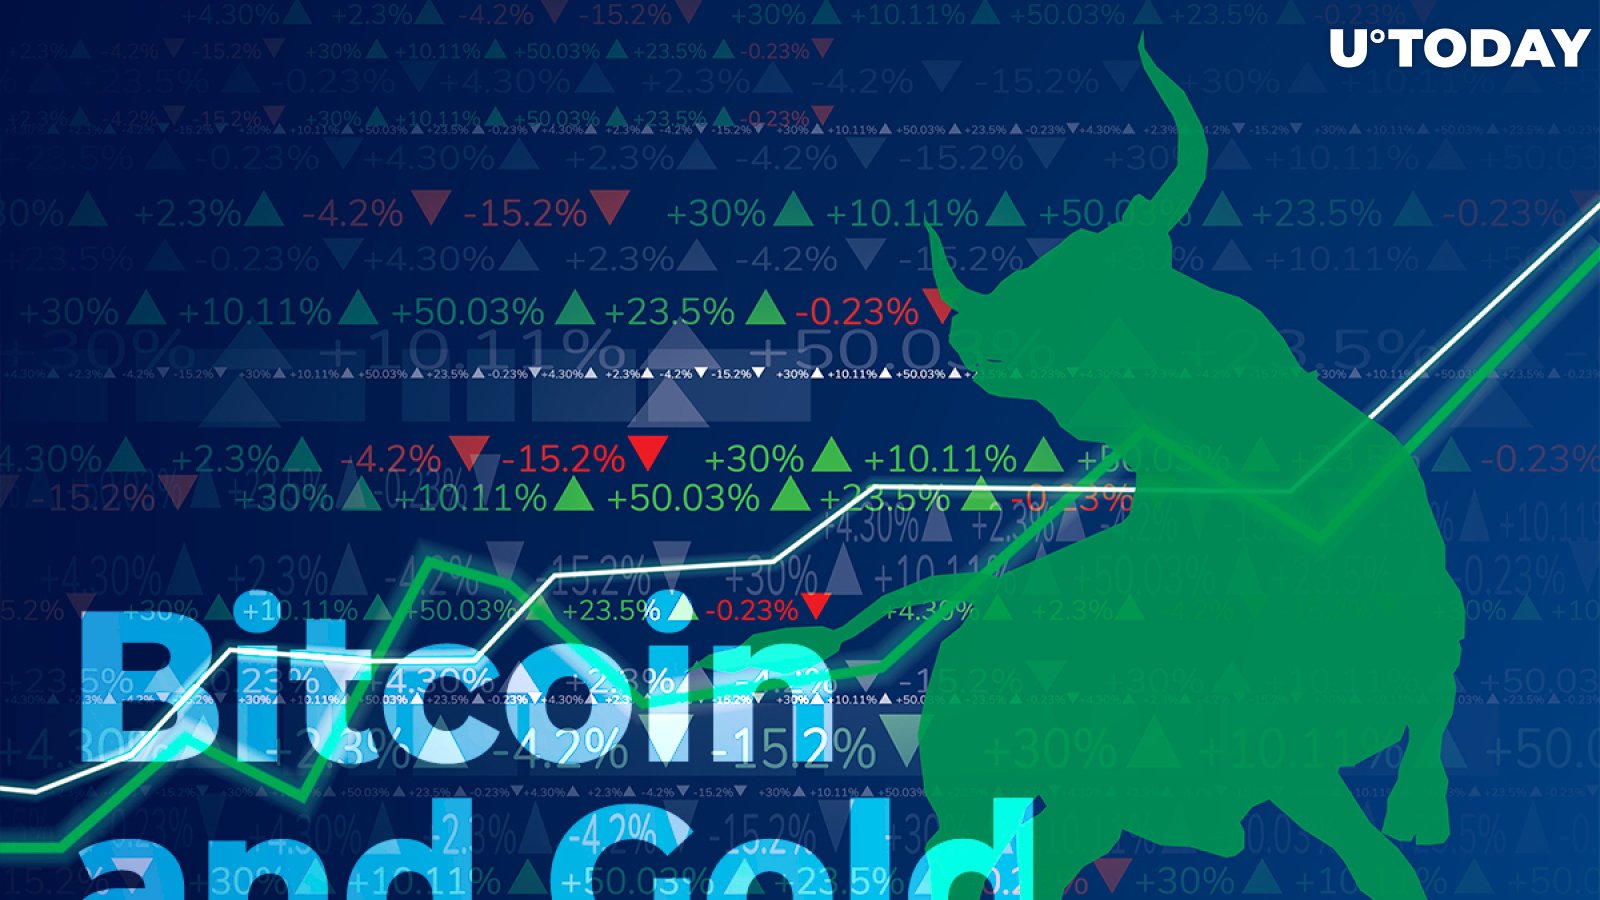 Bullish Implications for Bitcoin and Gold Spotted in 2H 2021: Bloomberg’s Mike McGlone